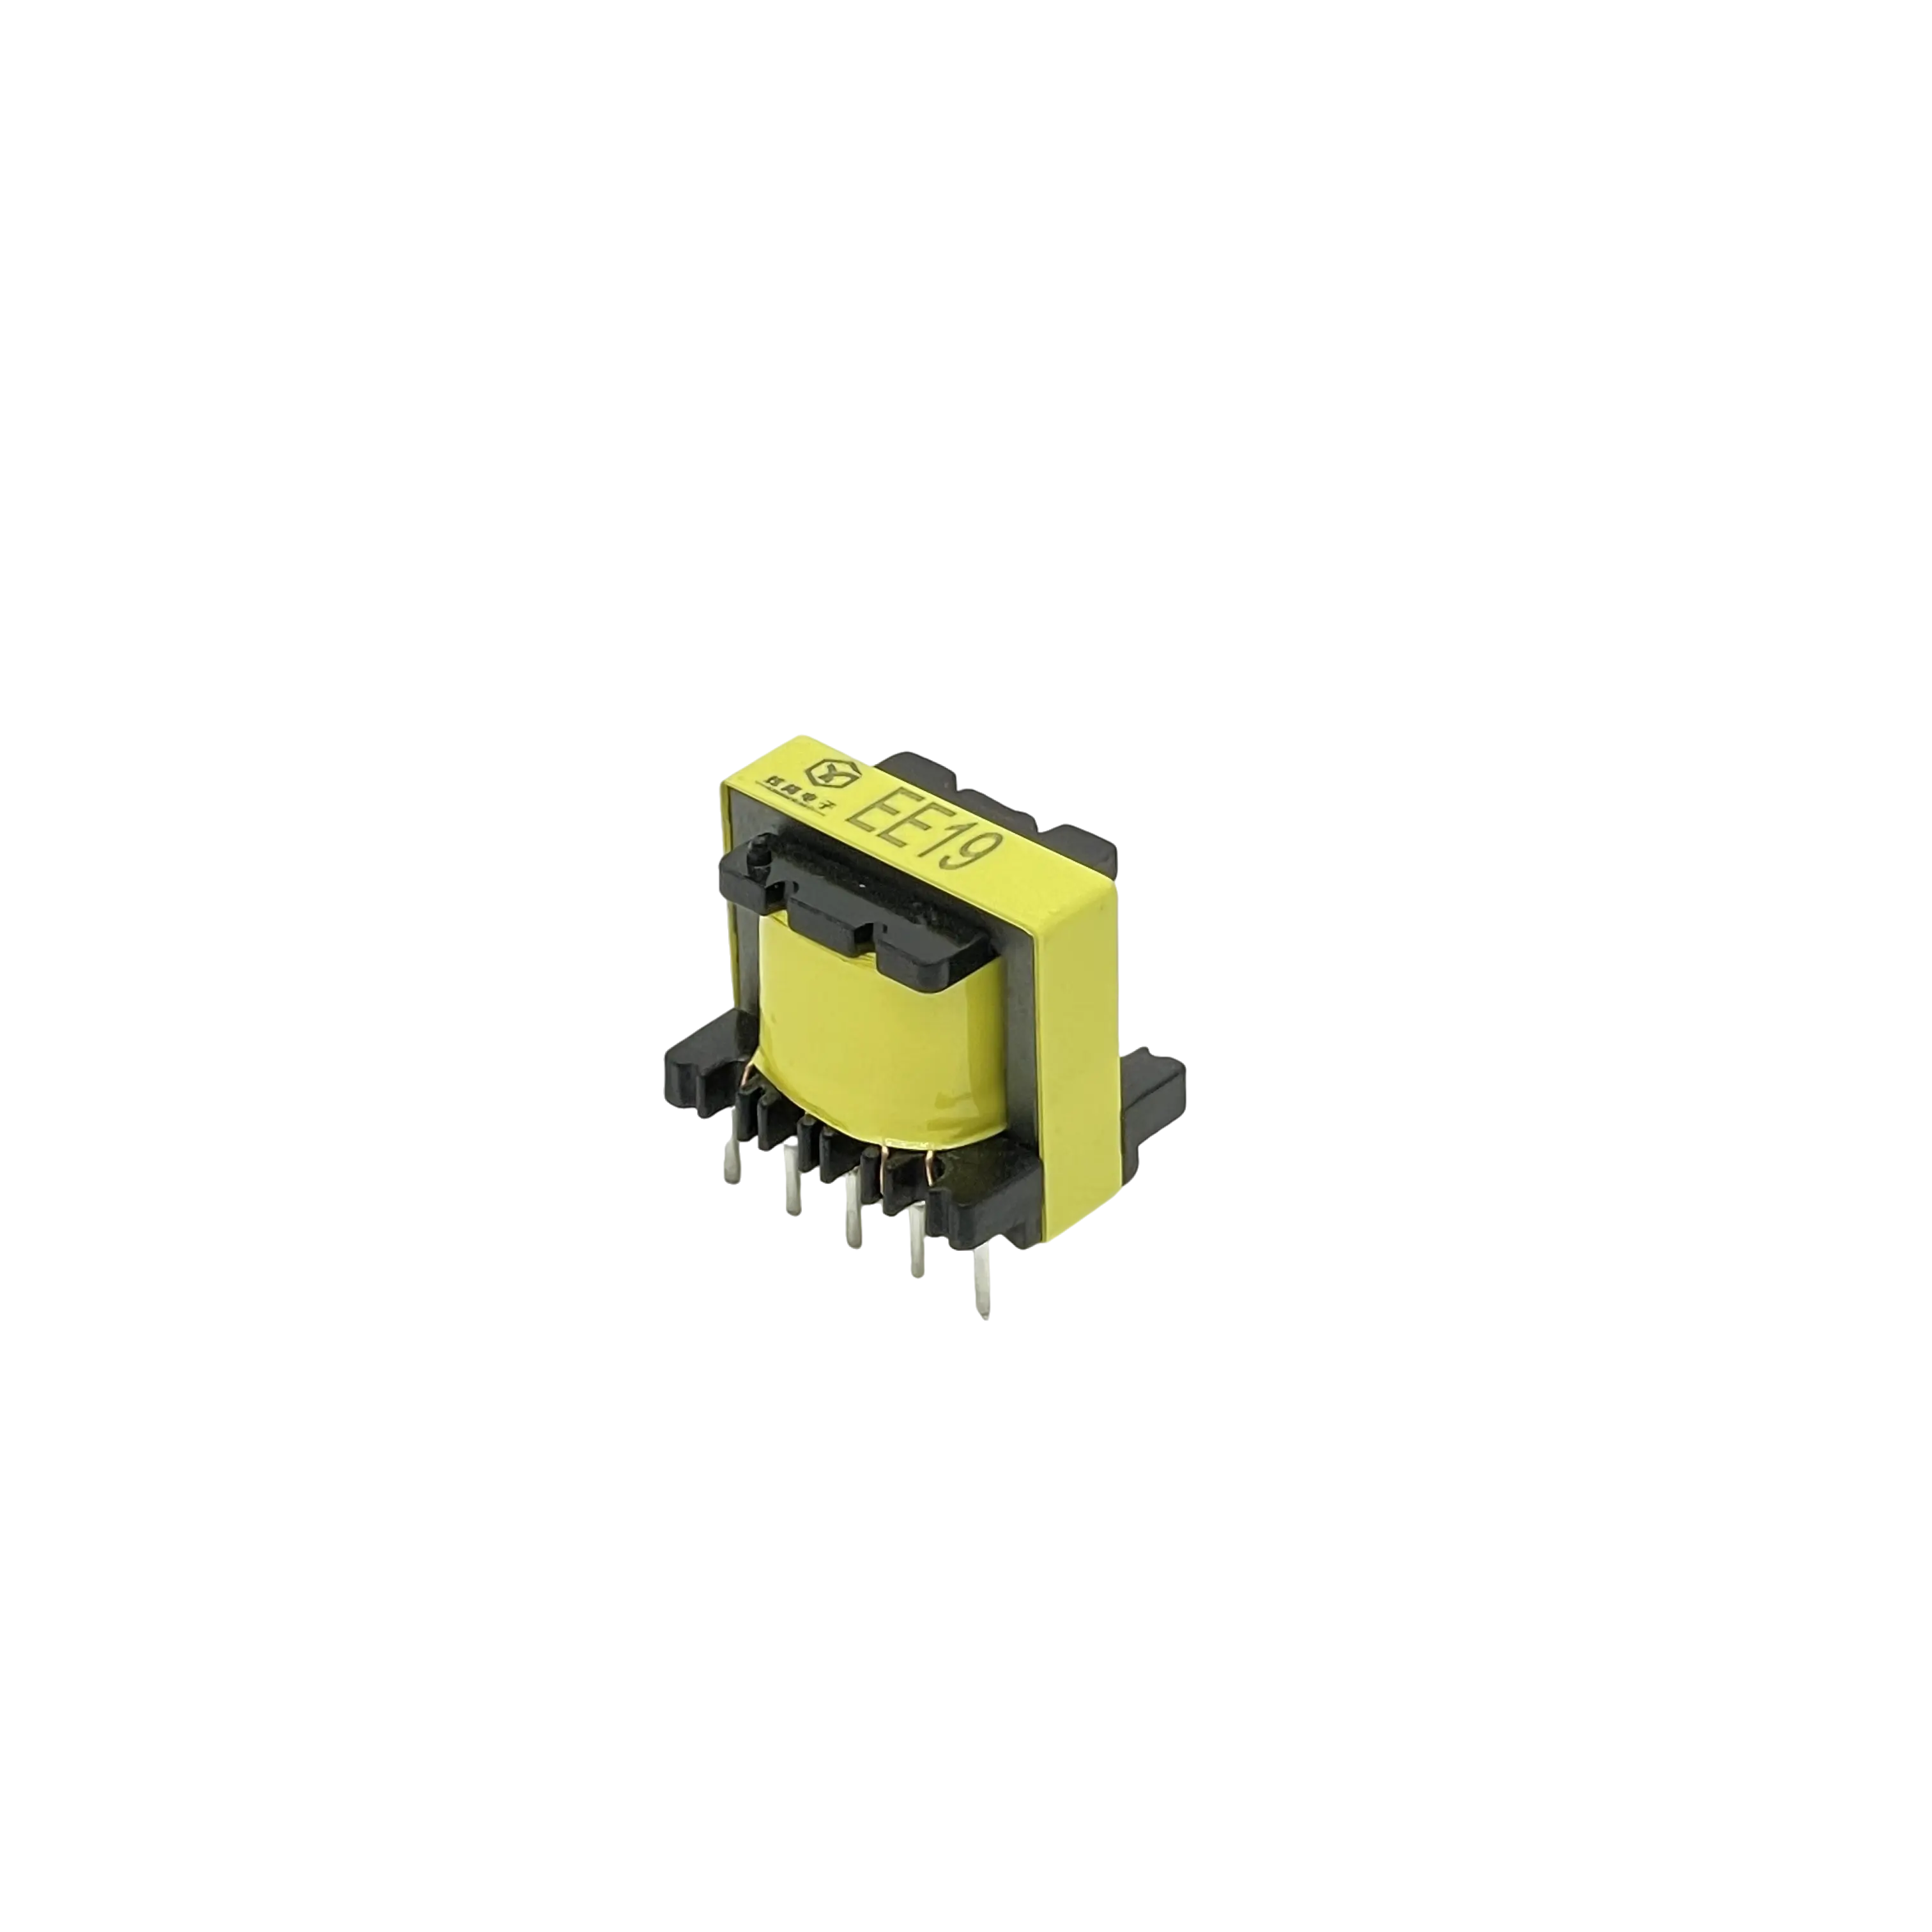 Custom Smd Fixed Power Common Mode Chokes Coil Filter Electronics Digital Amplifier Inductor Type